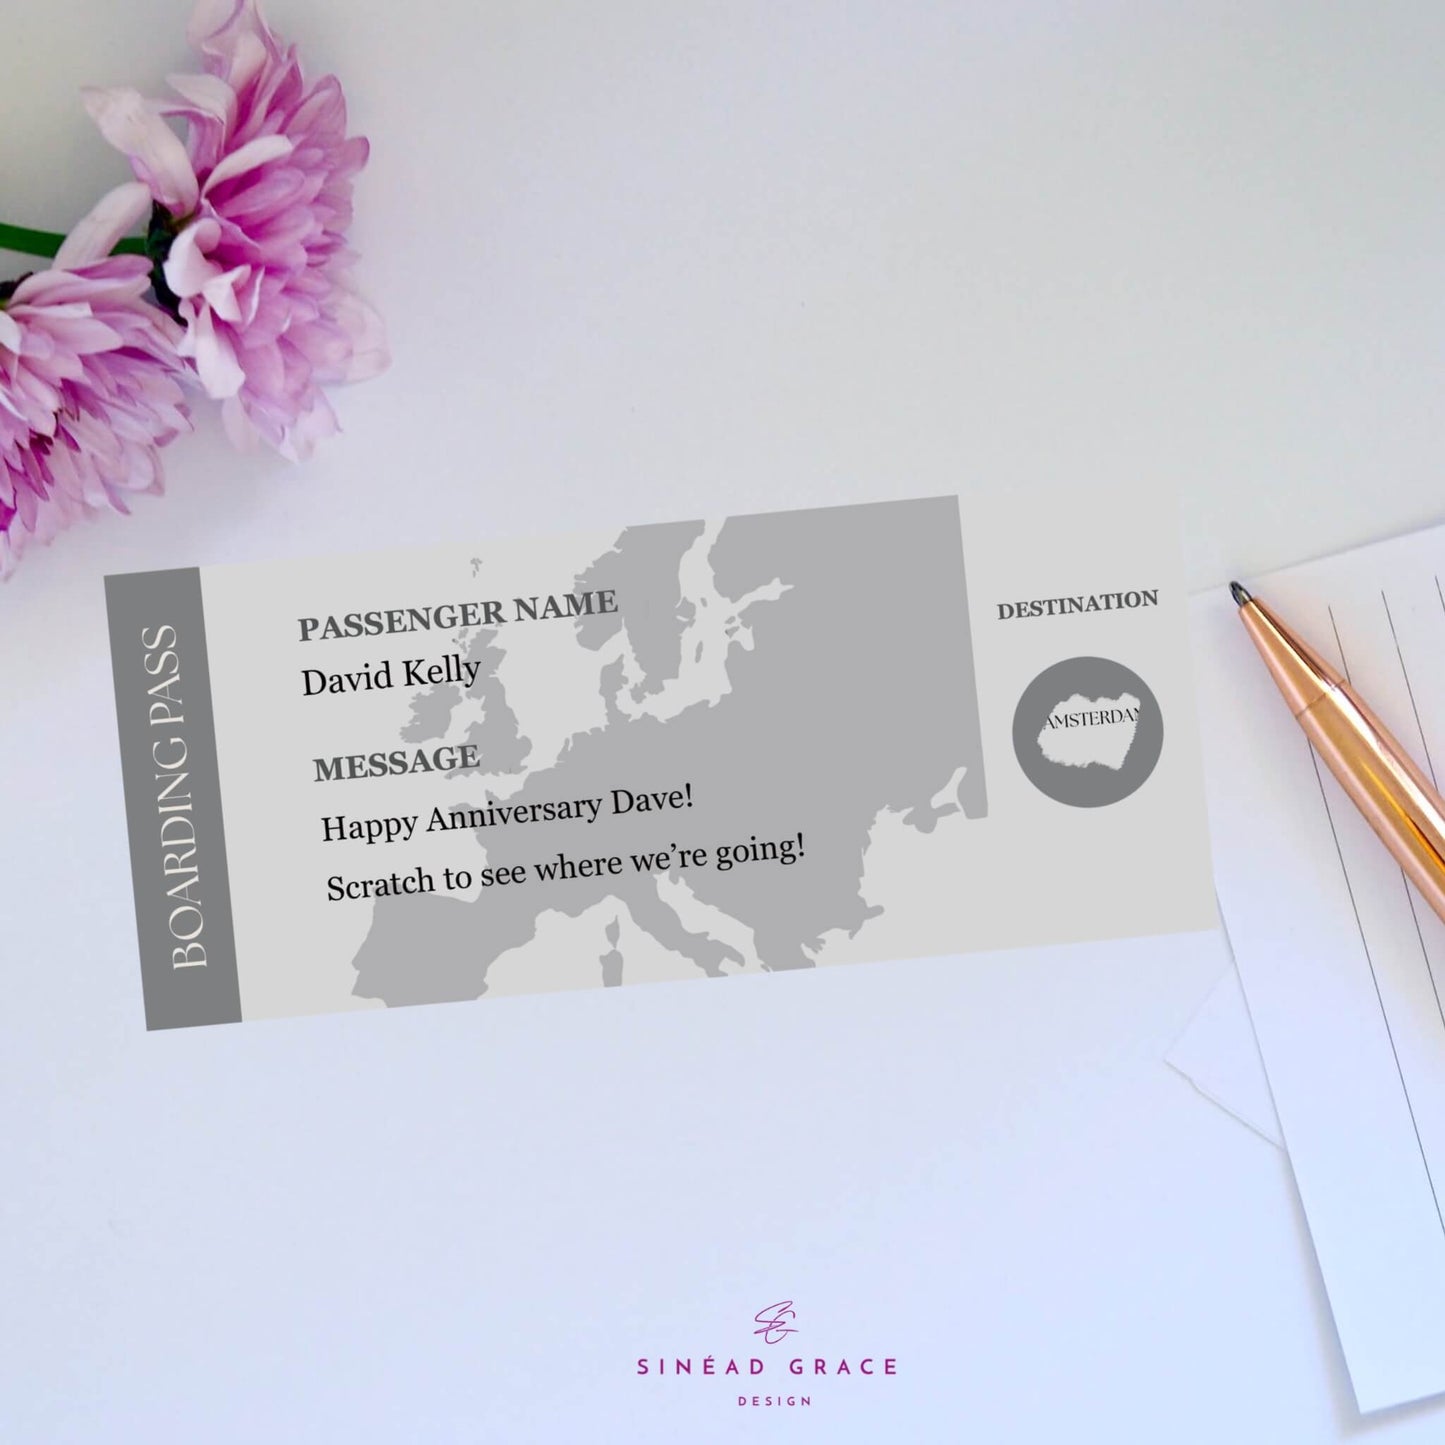 Personalised Boarding Pass Scratch Card